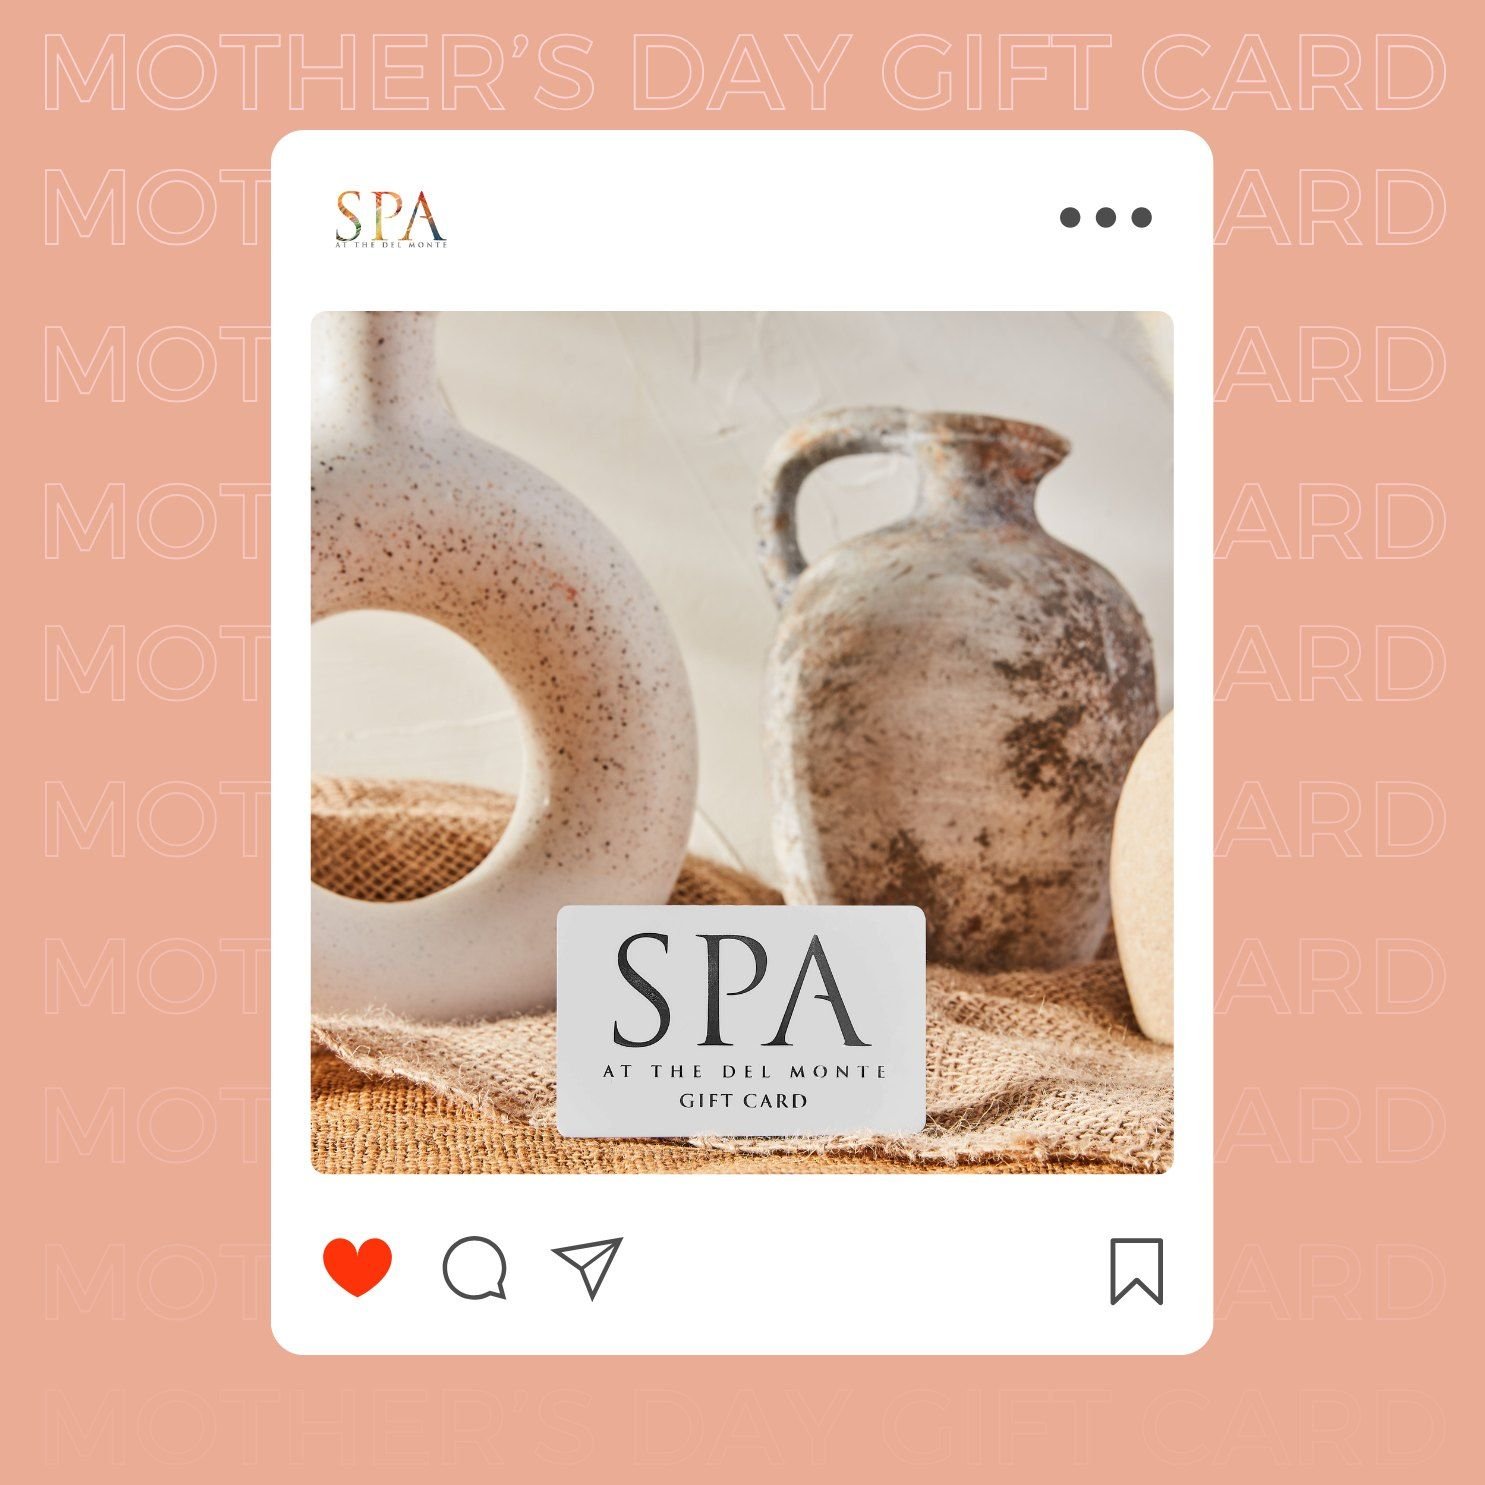 Forgot to get her a Spa at the Del Monte gift card for Mother's Day this year? No worries, you can still purchase them online or in store today!
.
.
.
#delmontespa #skinhealth #spalife #spalife #spa #dayspa #pittsford #skincare #shoplocal #treatyours